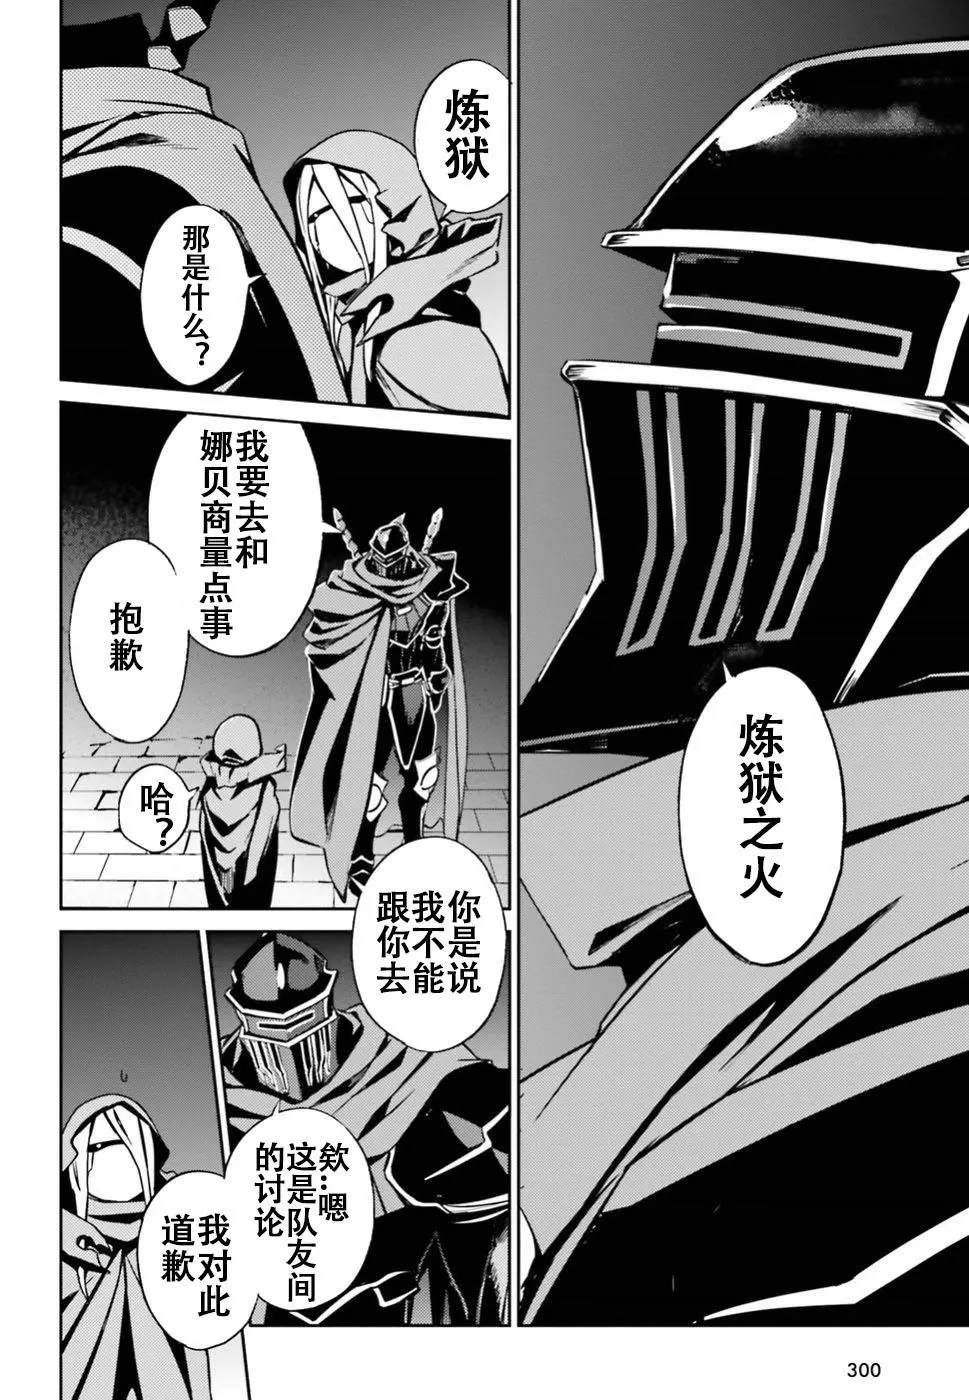 OVERLORD - 第47话 - 2